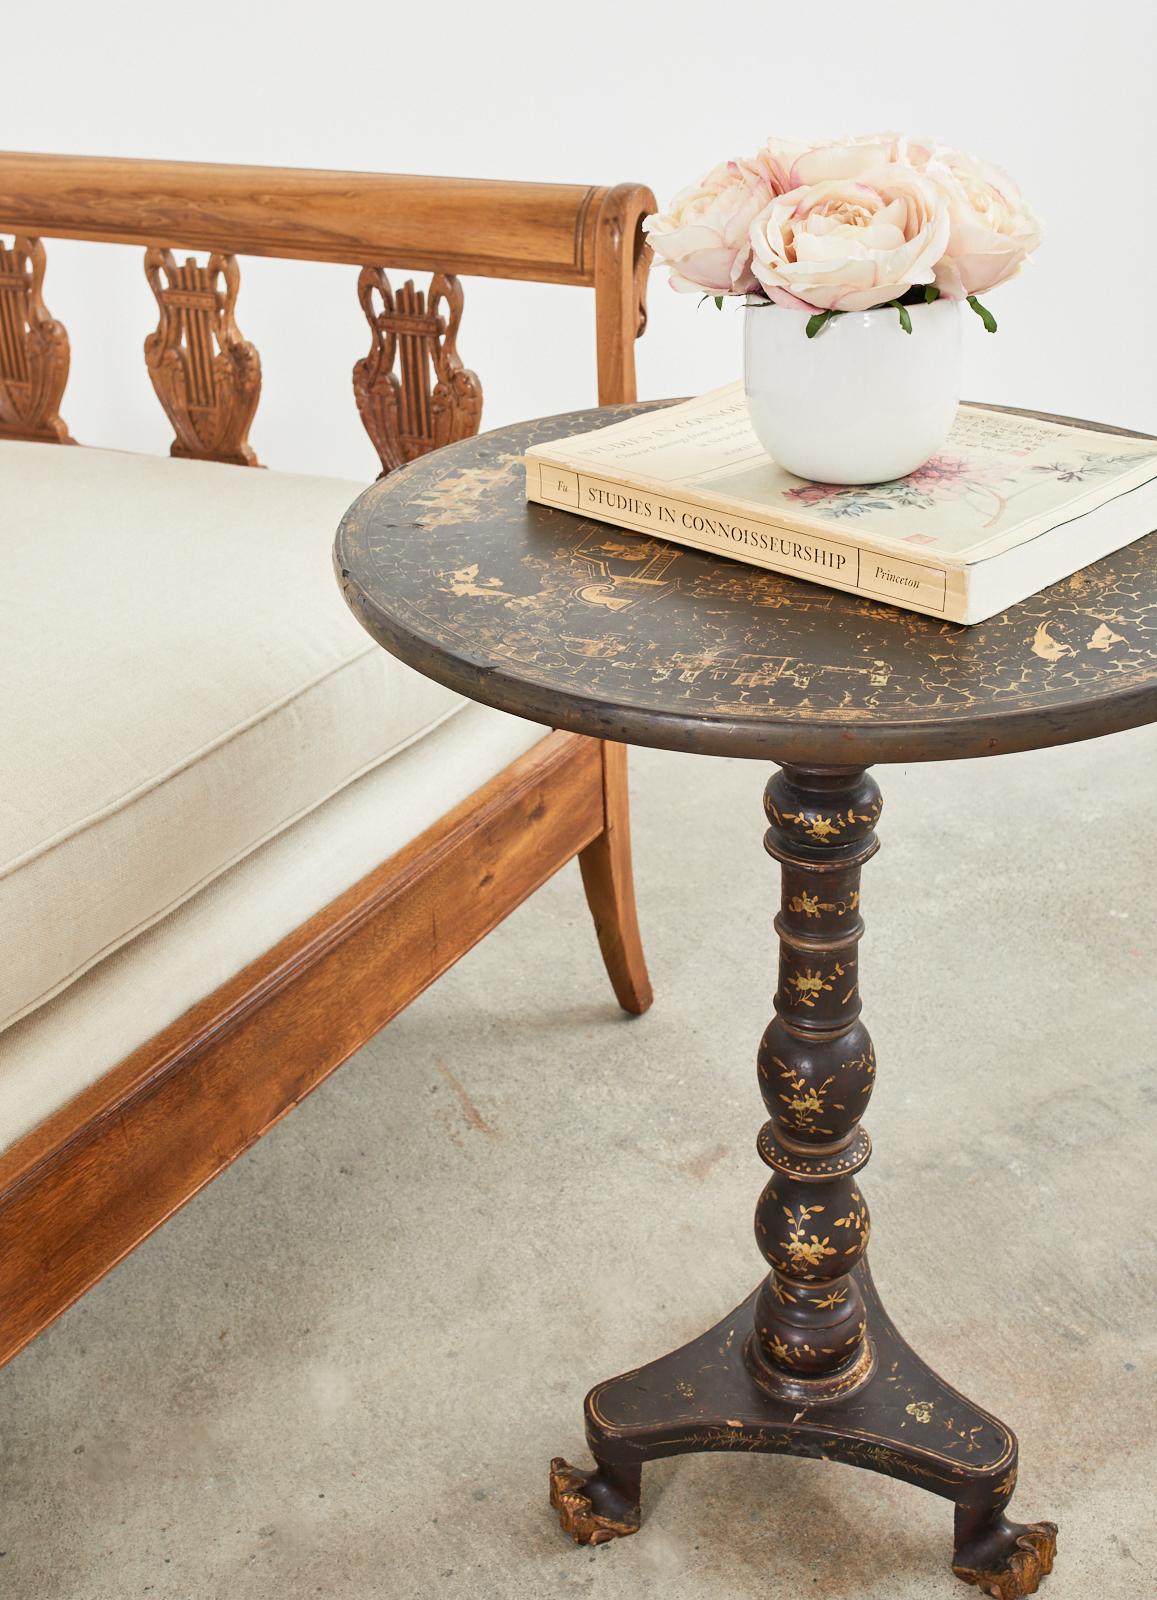 19th century Engish tilt-top pedestal table made in the Chinoiserie revival period. The round table features a birdcage base support mounted to a pedestal style turned column ending with tripod legs. The legs end with claw style feet. The table has